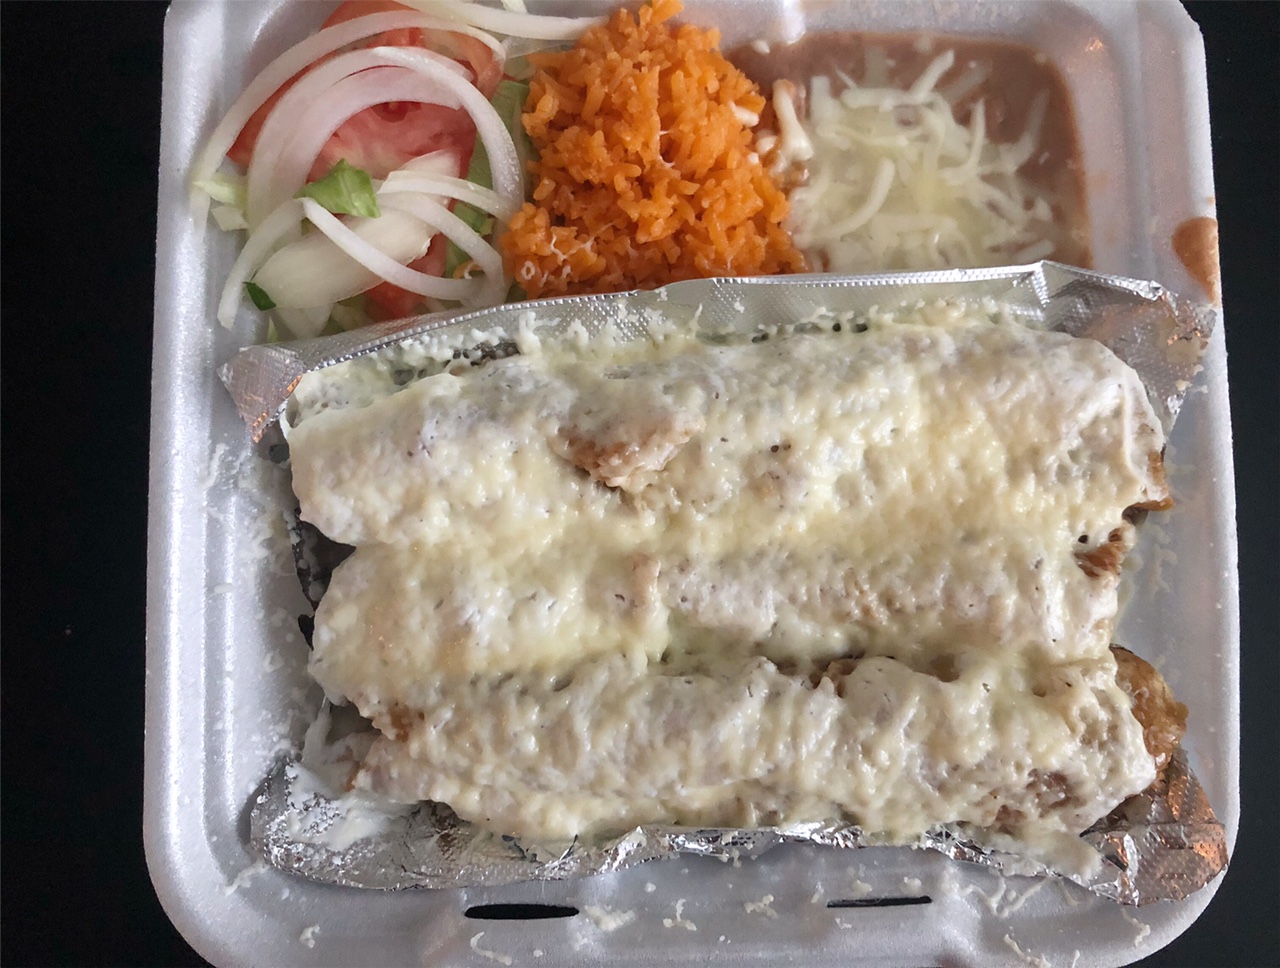 In a styrofoam container, there are three flautas covered in cheese atop tin foil. In the other divider, from the left, there are onion slices, a tomato slice, lettuce, then Mexican rice, and then beans. Photo by Alyssa Buckley.